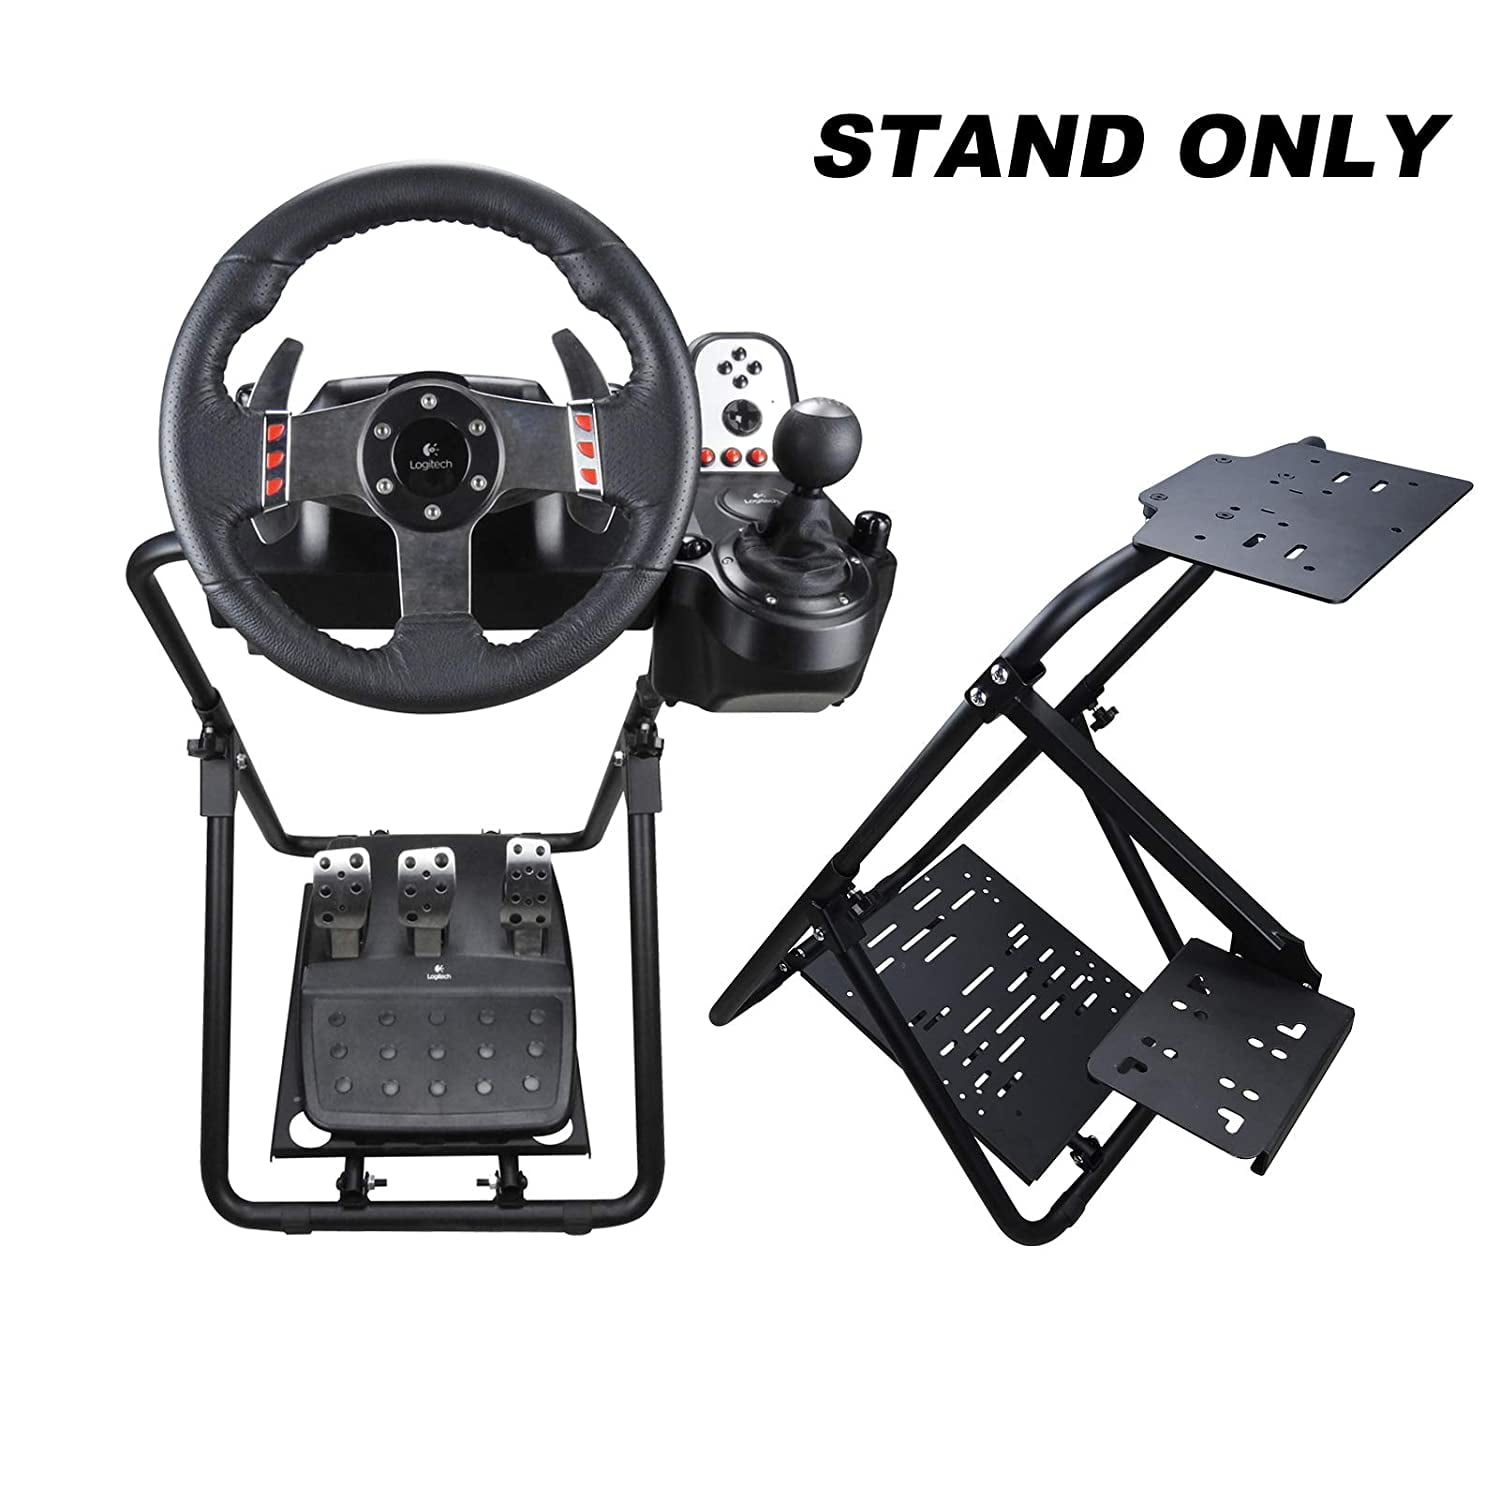  DIWANGUS Racing Wheel Stand Foldable Steering Wheel Adjustable  Stand for Logitech G29 G920 G923 G27 G25 for Thrustmaster T248X T248 T300RS  T150 458 TX Xbox PS4 PS5 : Video Games